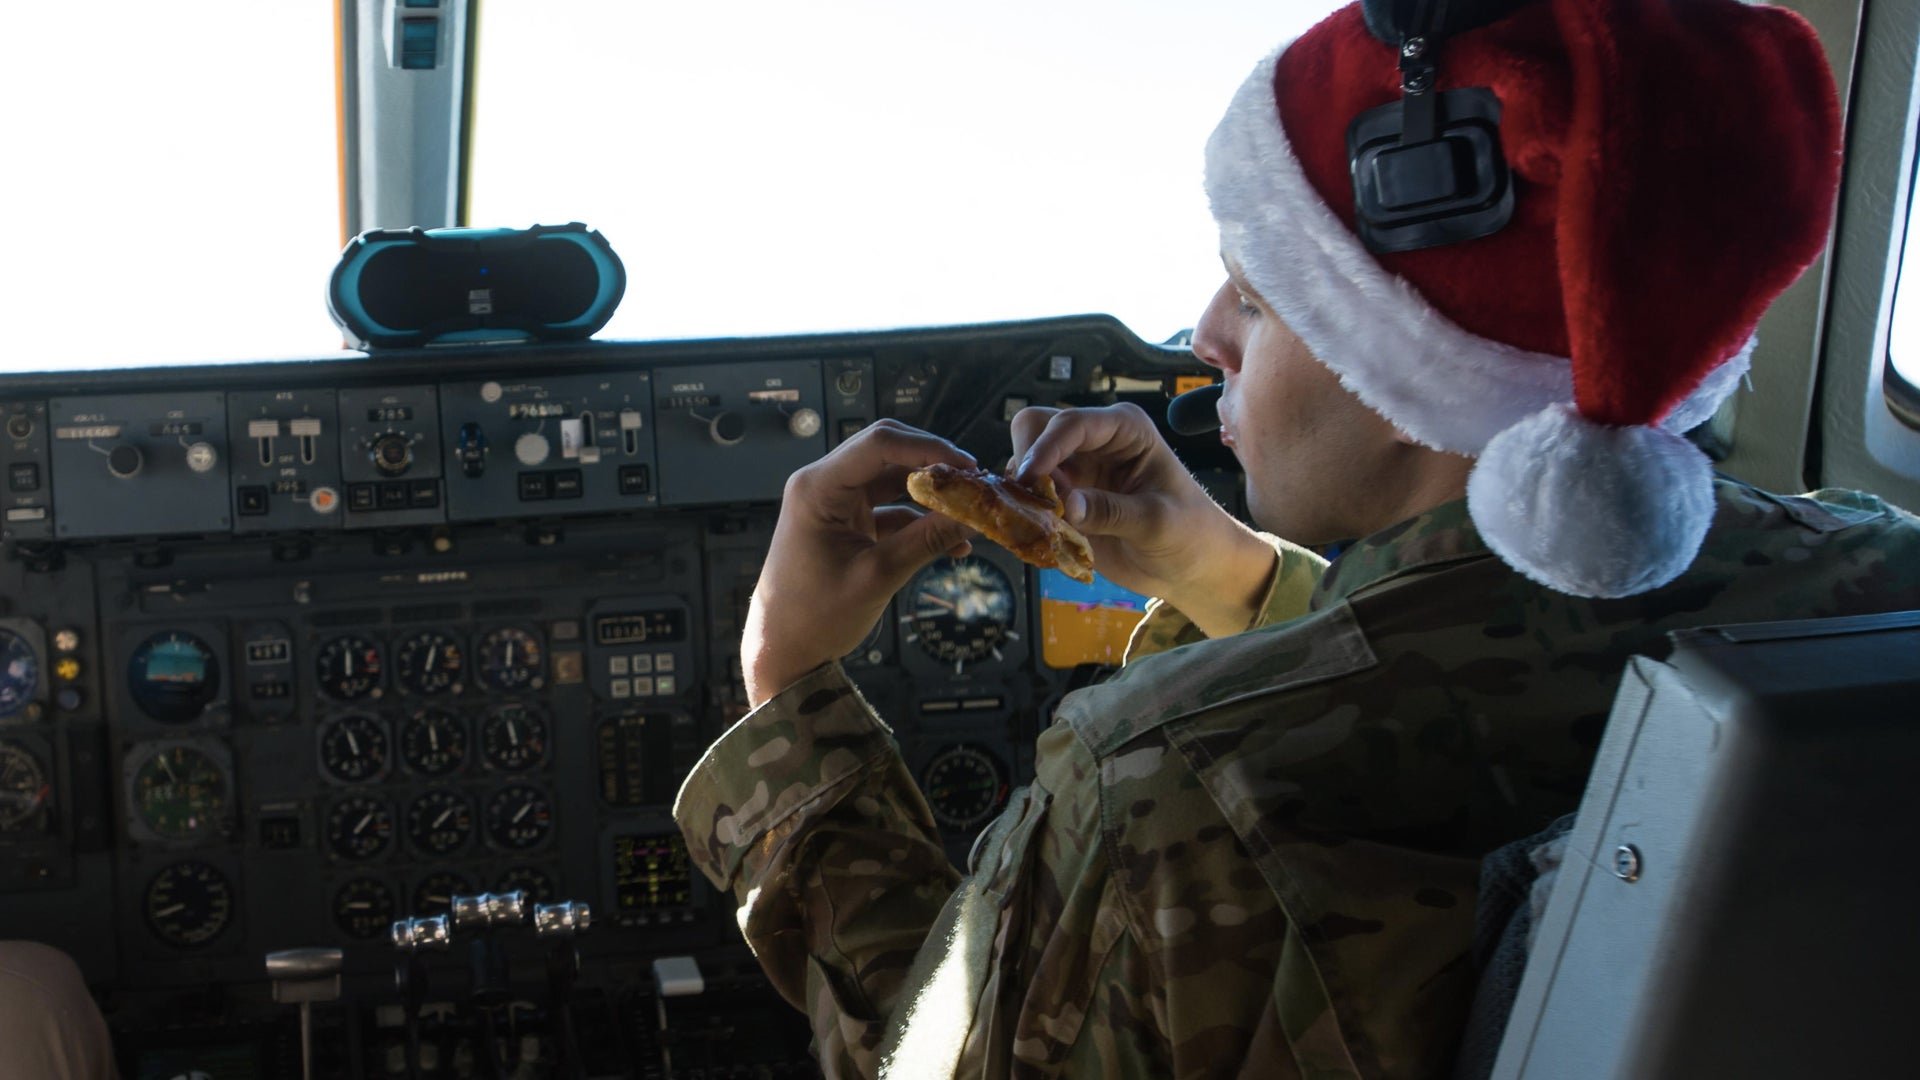 First Lt. Andrew, a 380th Air Expeditionary Wing KC-10 Extender pilot, eats reheated pizza during a sortie in support of Combined Joint Task Force-Operation Inherent Resolve over Iraq, Dec. 25, 2016. Crew members used two small ovens to prepare their holiday meal. (Senior Airman Tyler Woodward/U.S. Air Force)